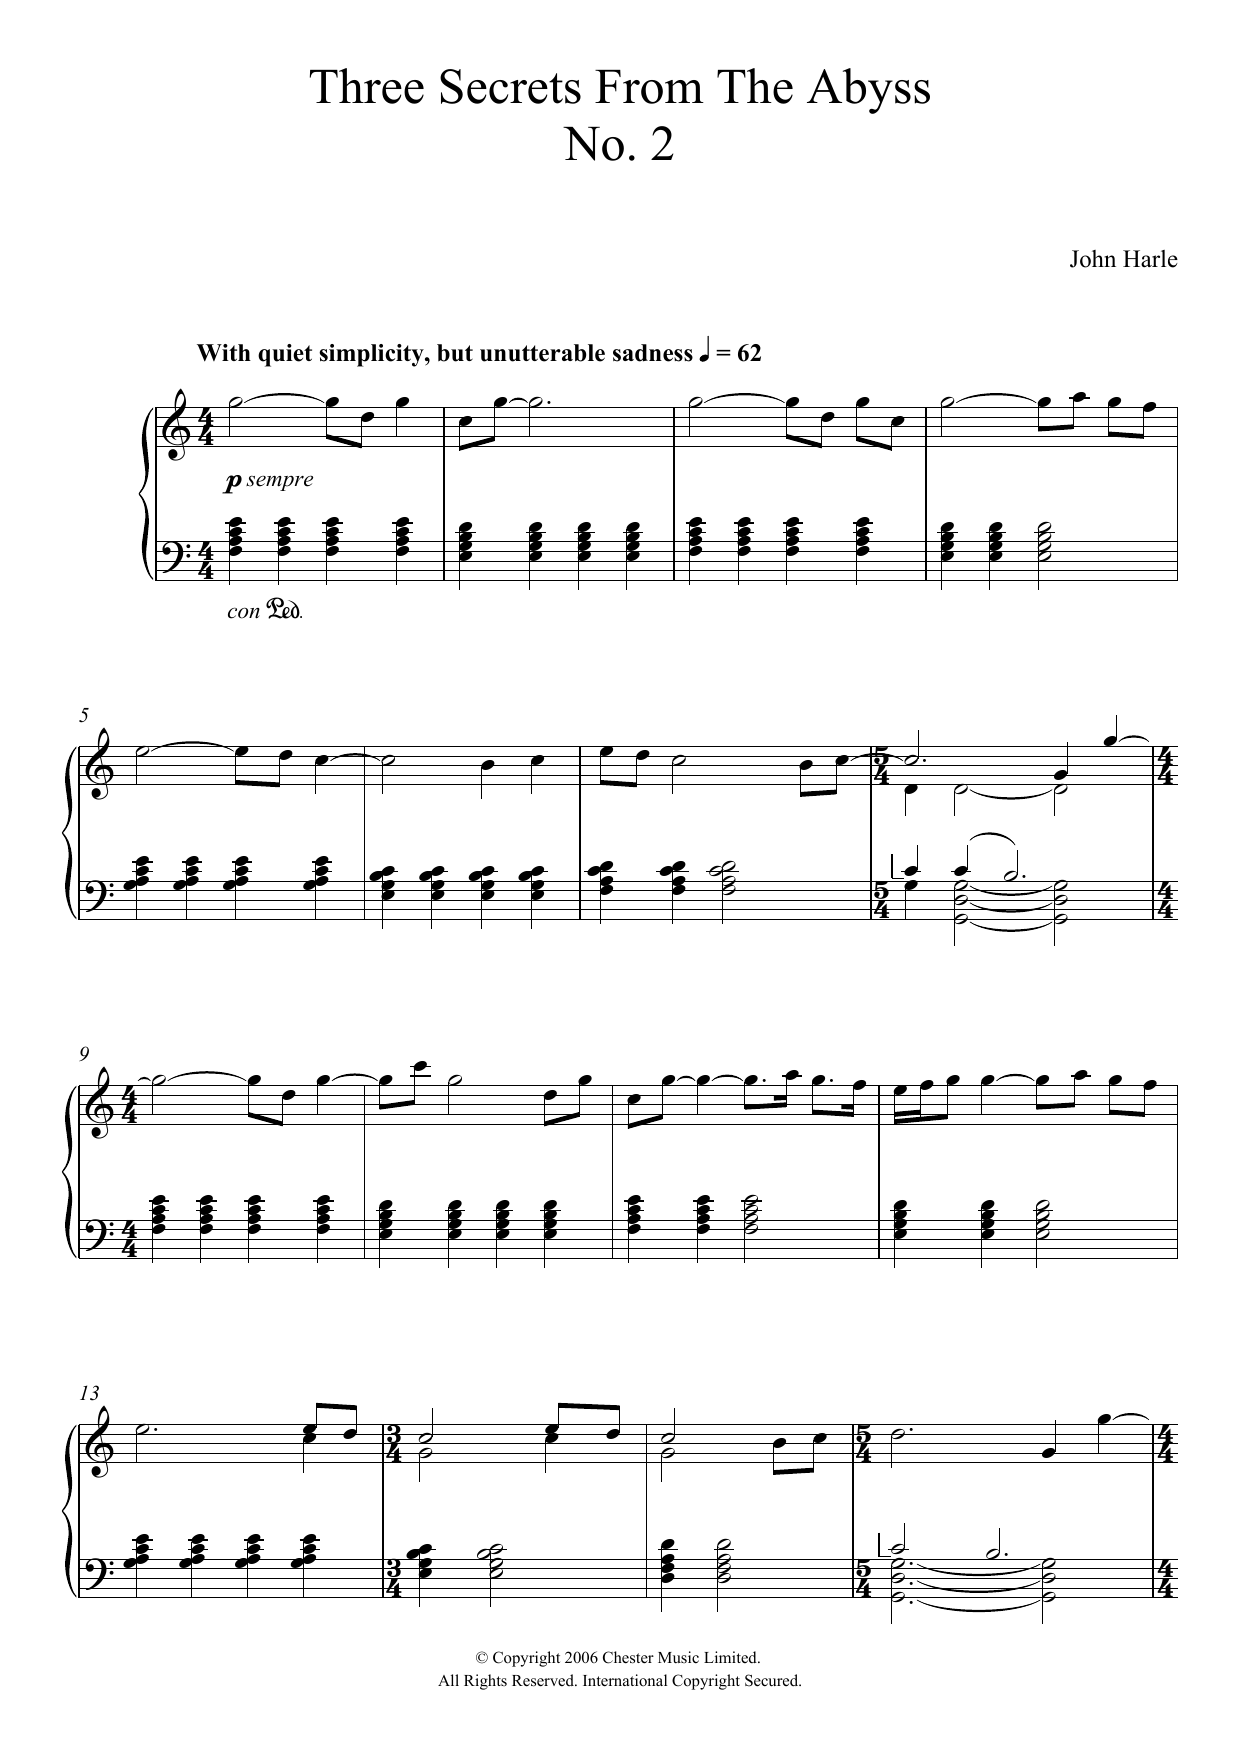 Download John Harle Three Secrets From The Abyss - No. 2 Sheet Music